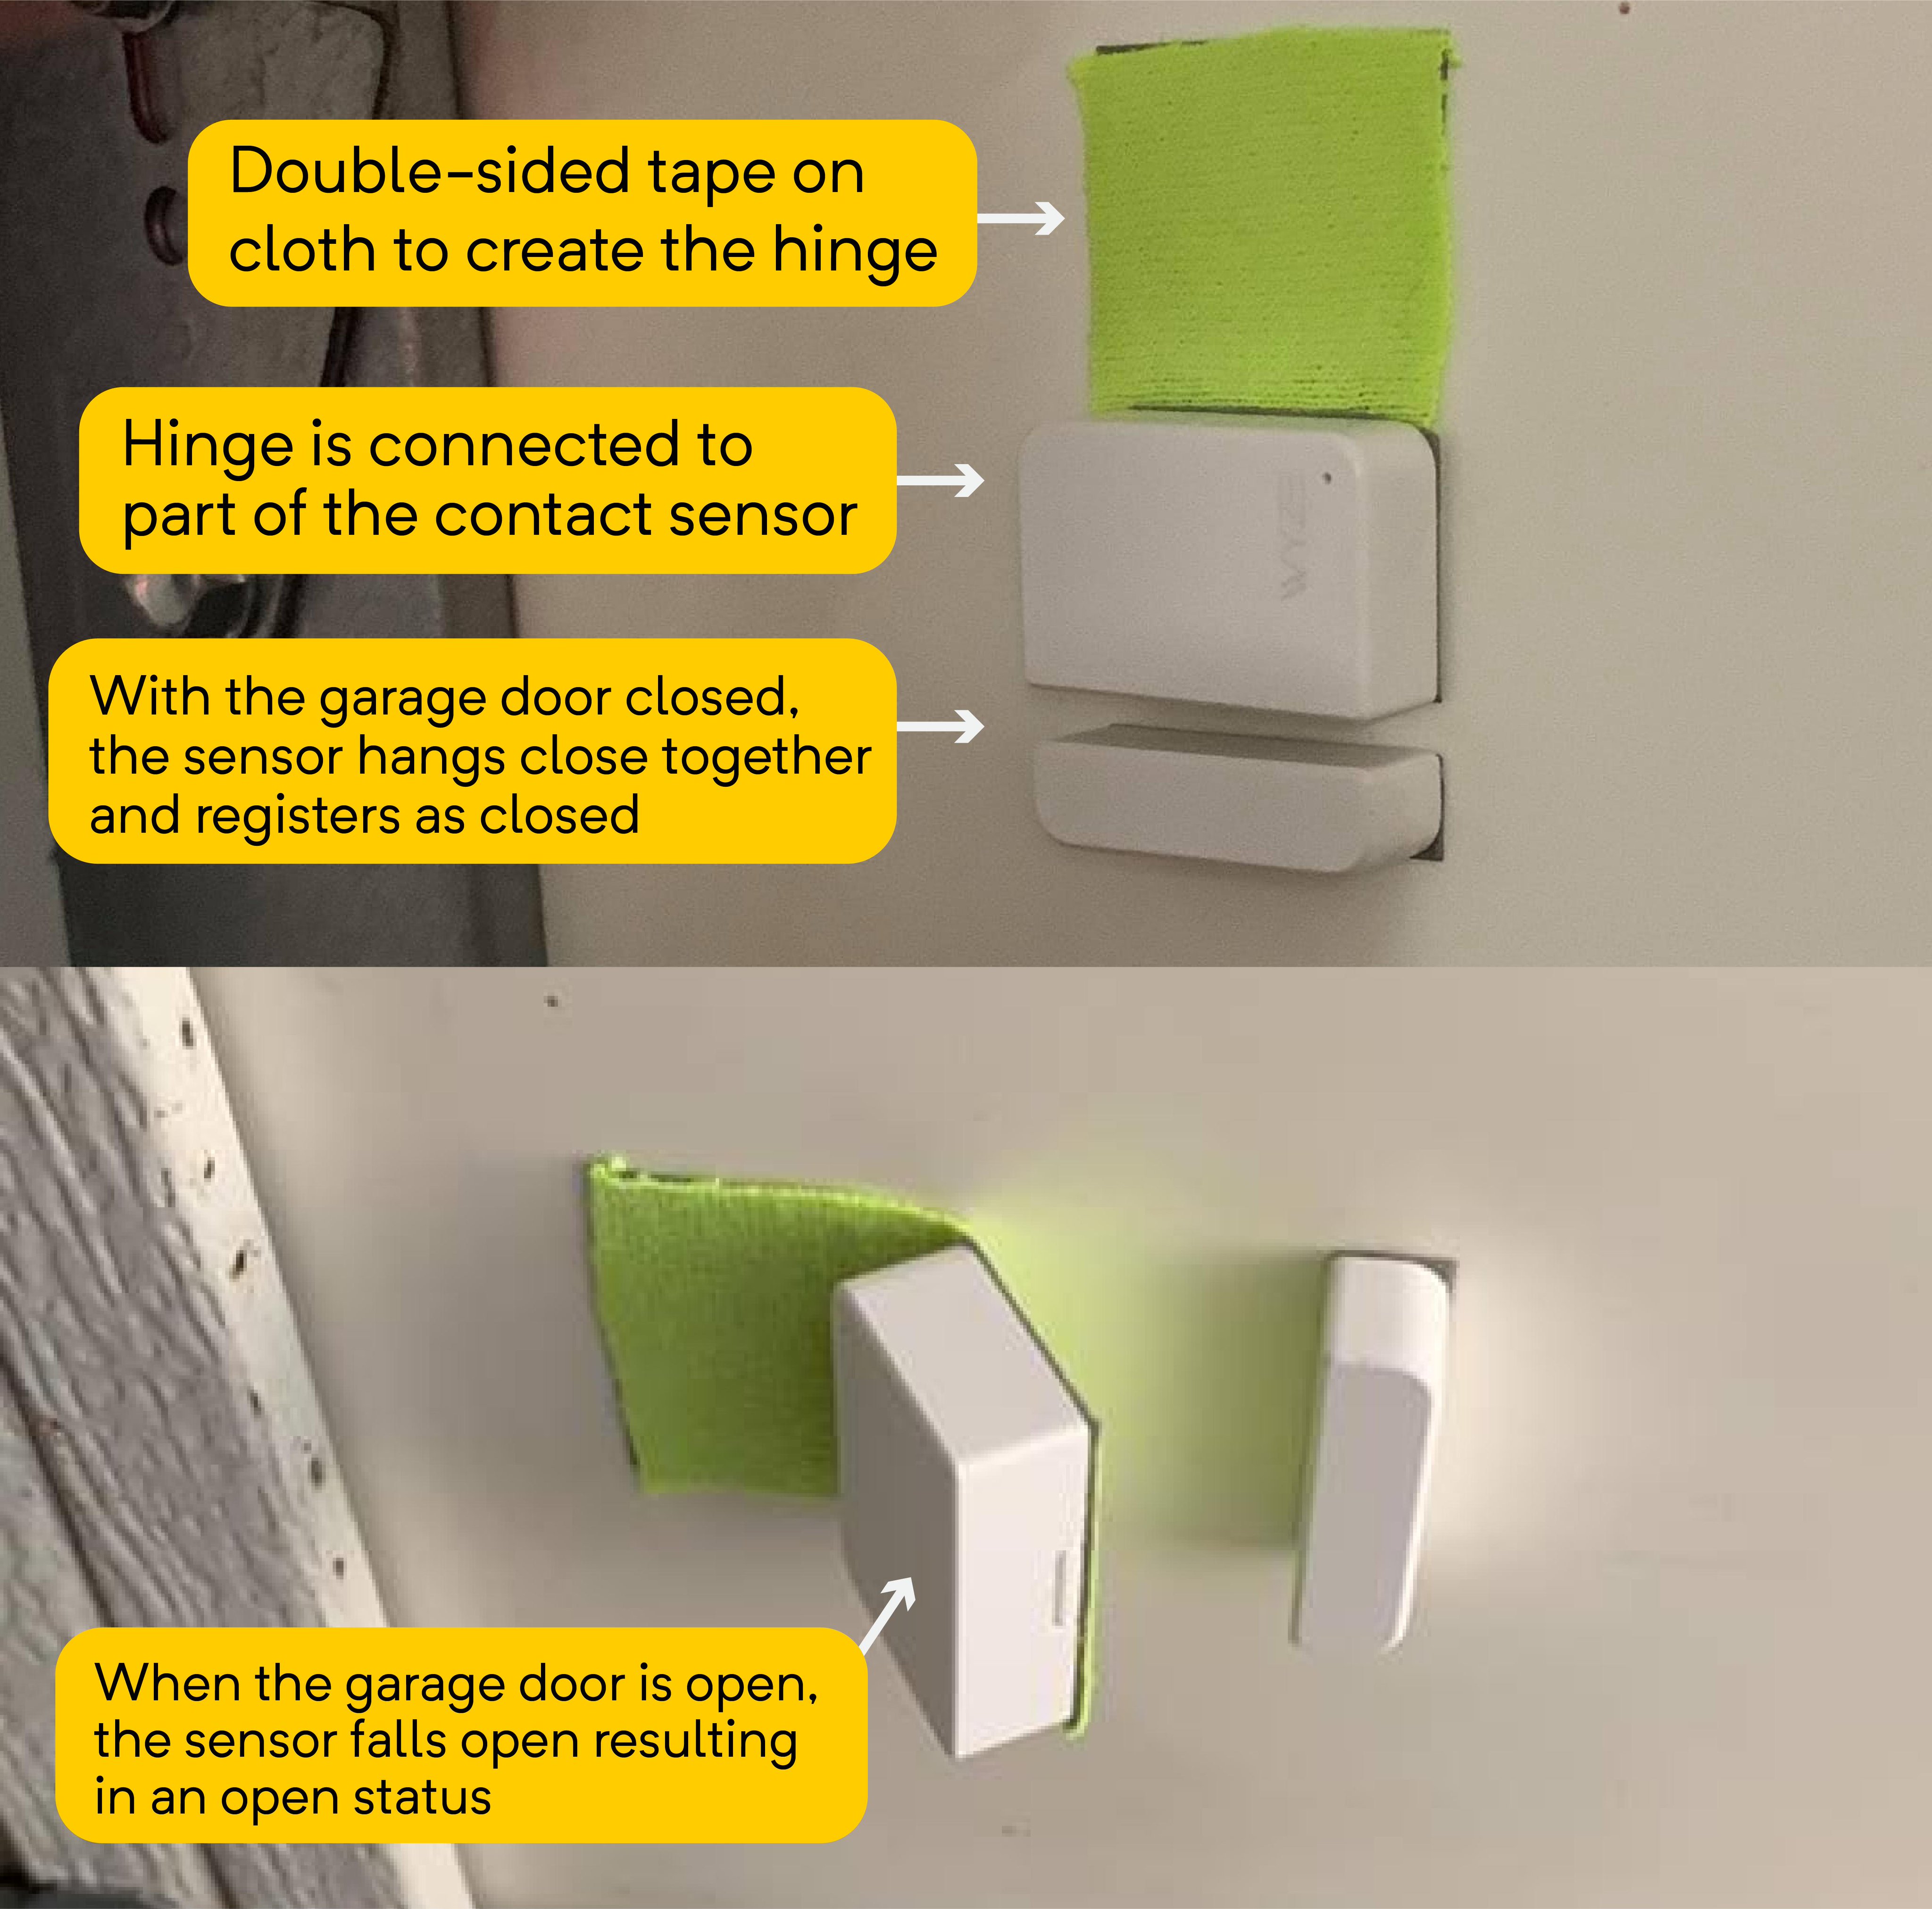 blad karton Mig selv Wyze  on Twitter: "Don P. made a hinge using cloth and double-sided tape  to attach his Wyze Sense to his garage door. When the door is open, the  sensor hangs open.